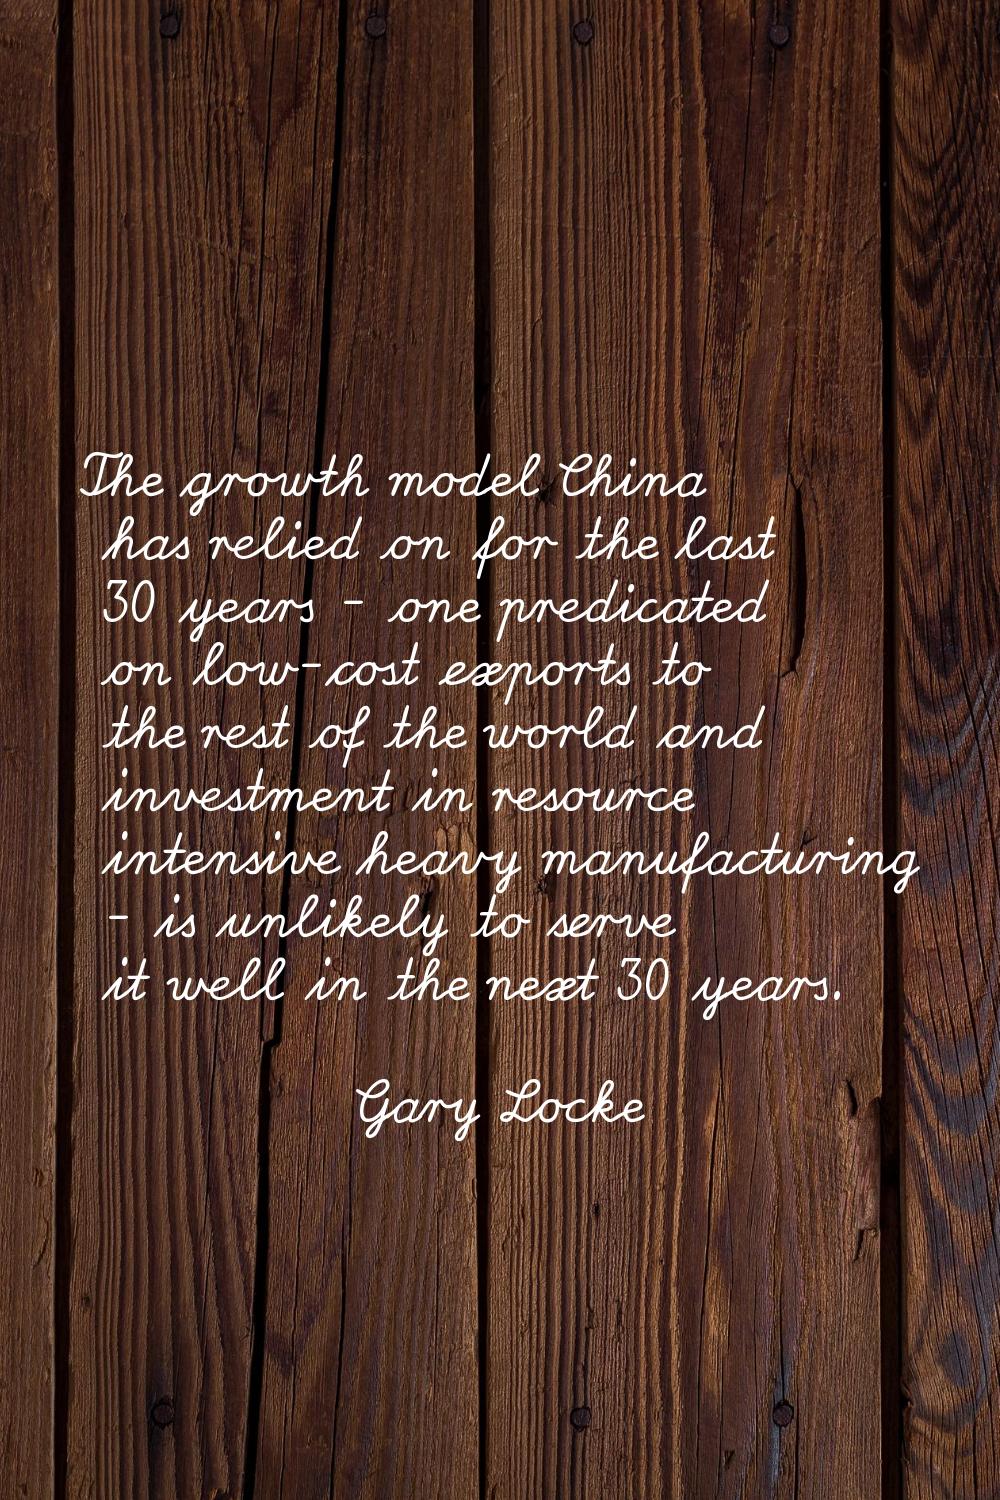 The growth model China has relied on for the last 30 years - one predicated on low-cost exports to 